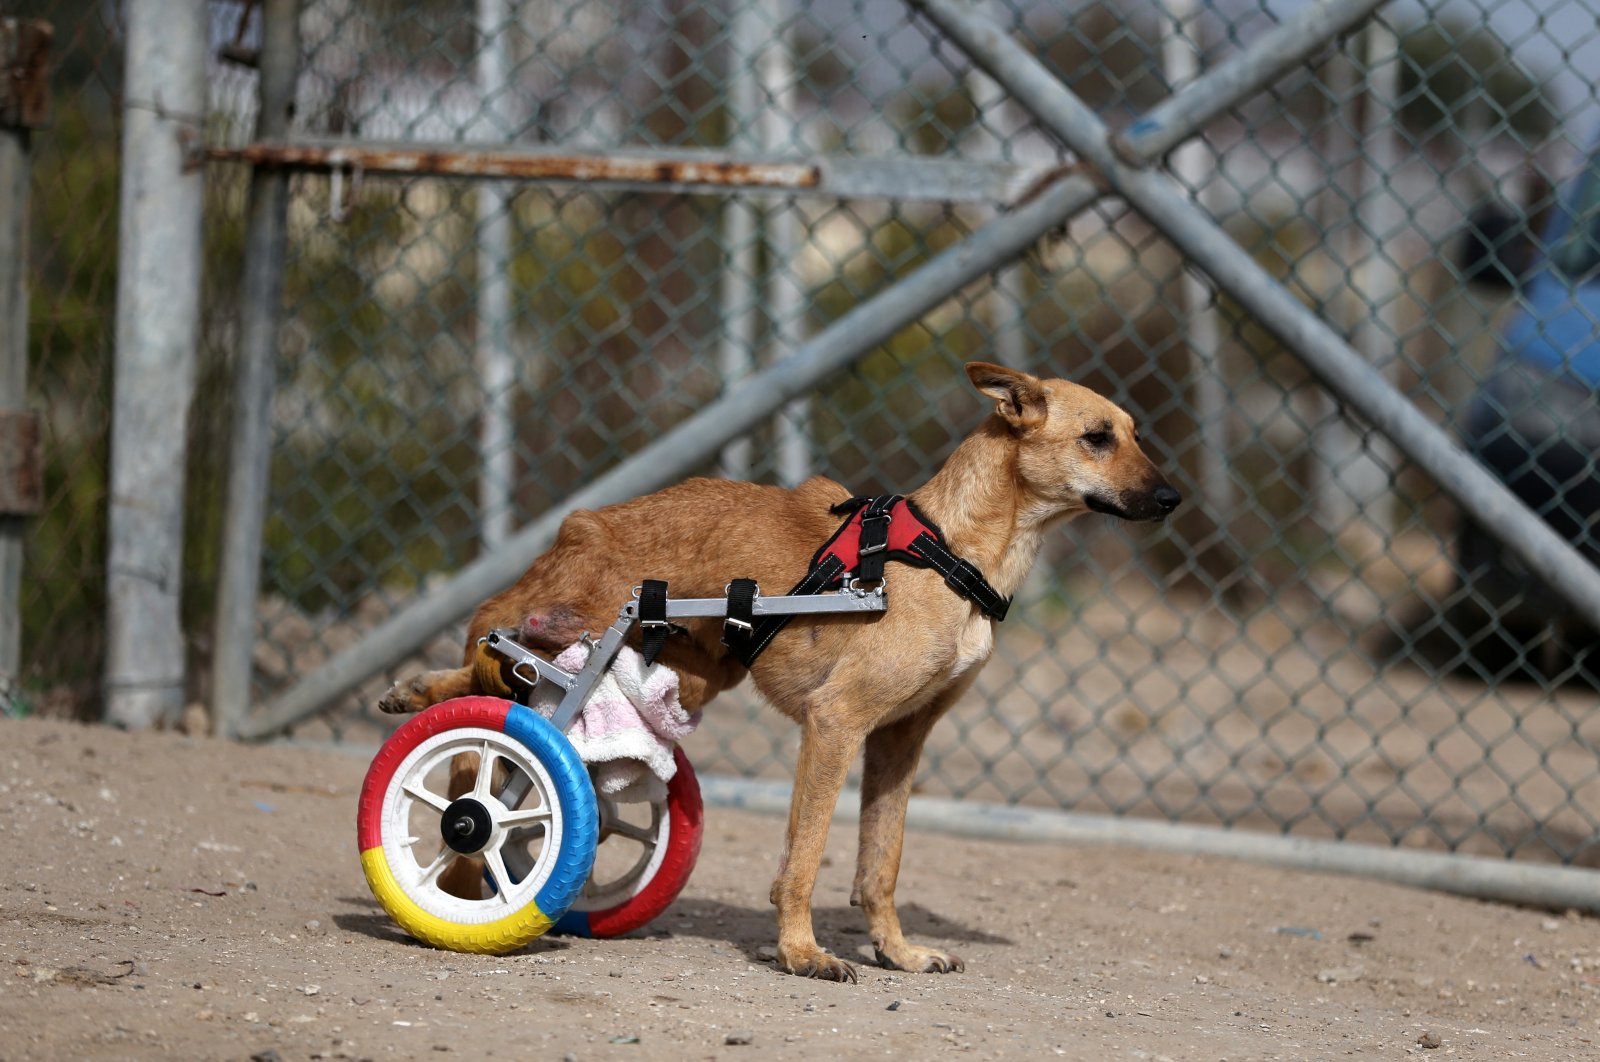 A paralyzed dog trains to walk using a new wheelchair in Gaza City, Palestine, Dec. 6, 2021. (Reuters Photo)